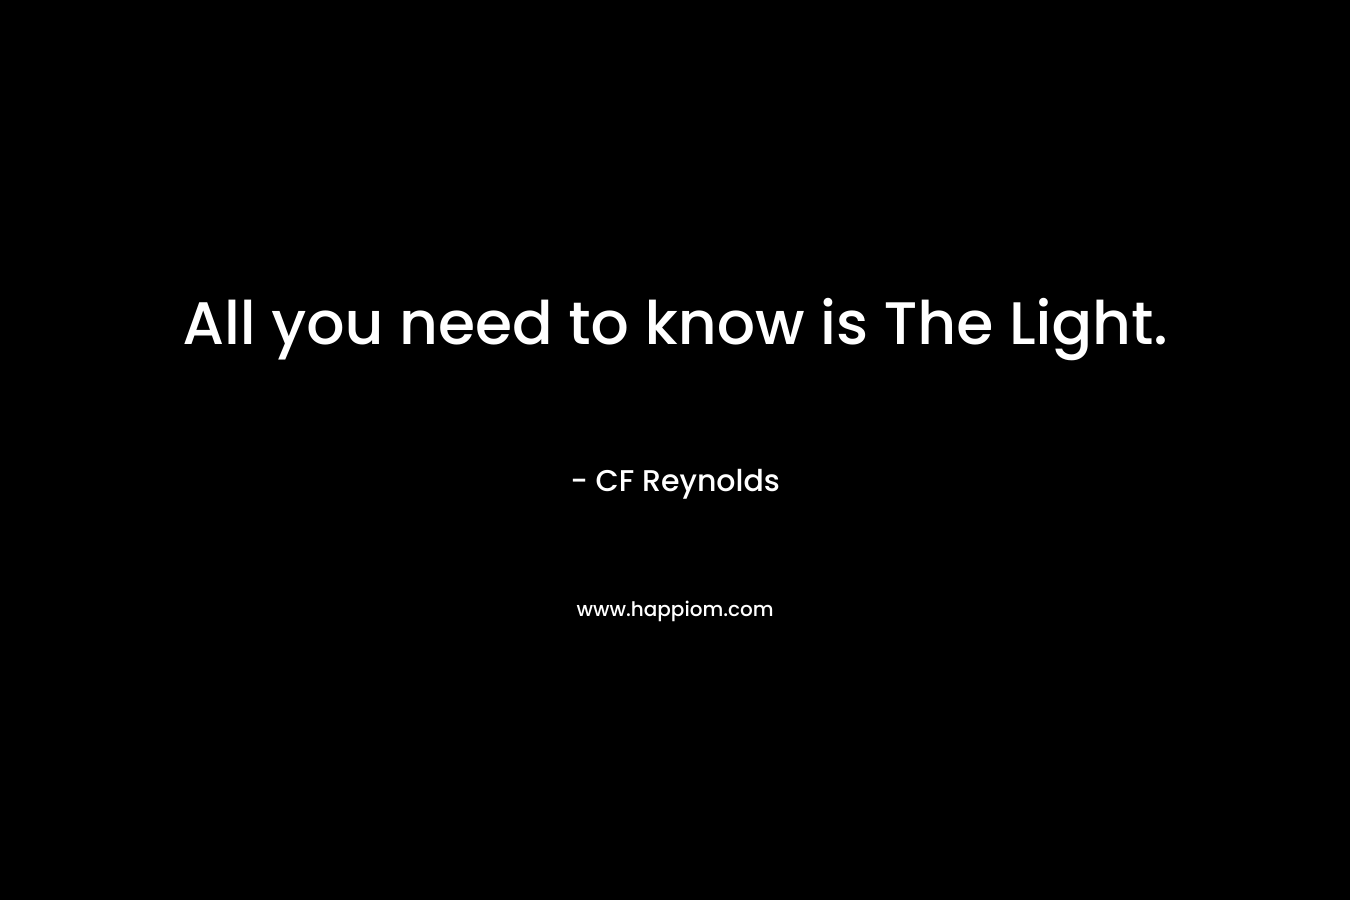 All you need to know is The Light.